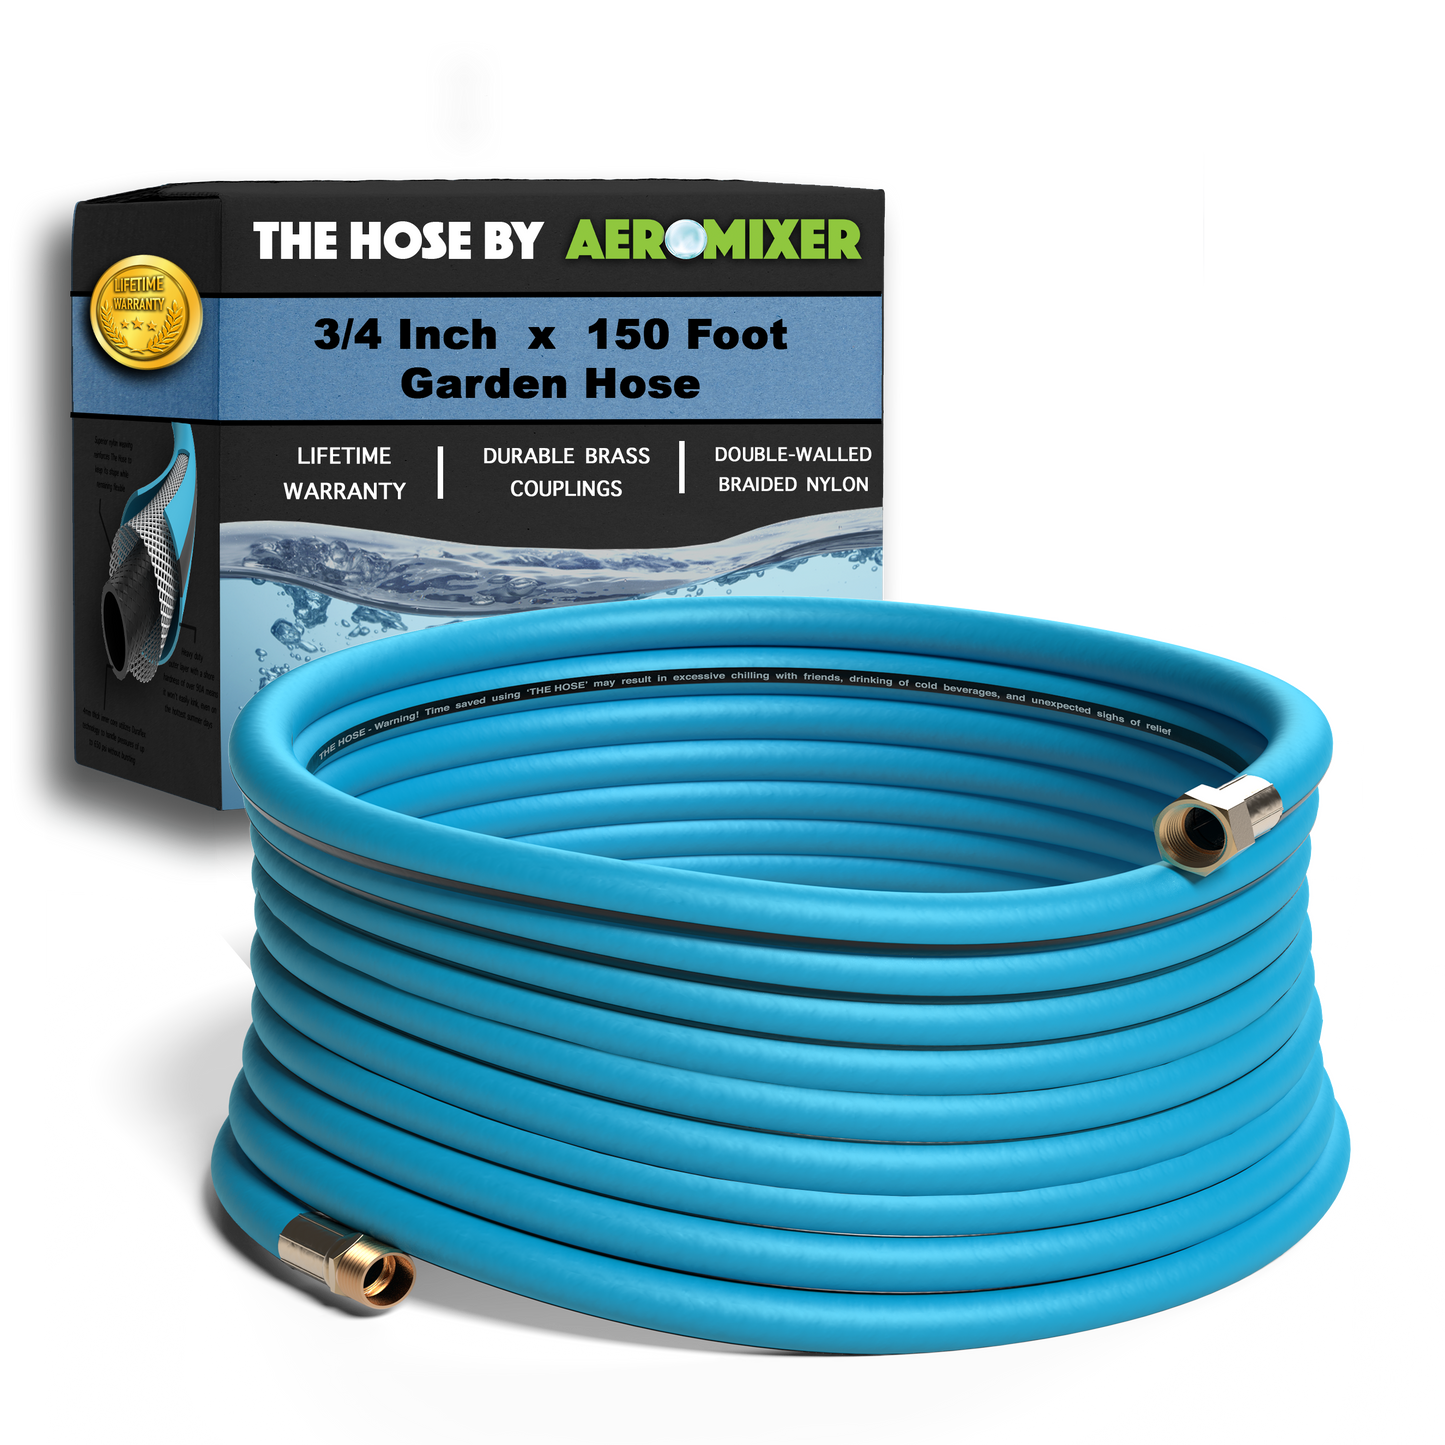 THE HOSE: By Aeromixer